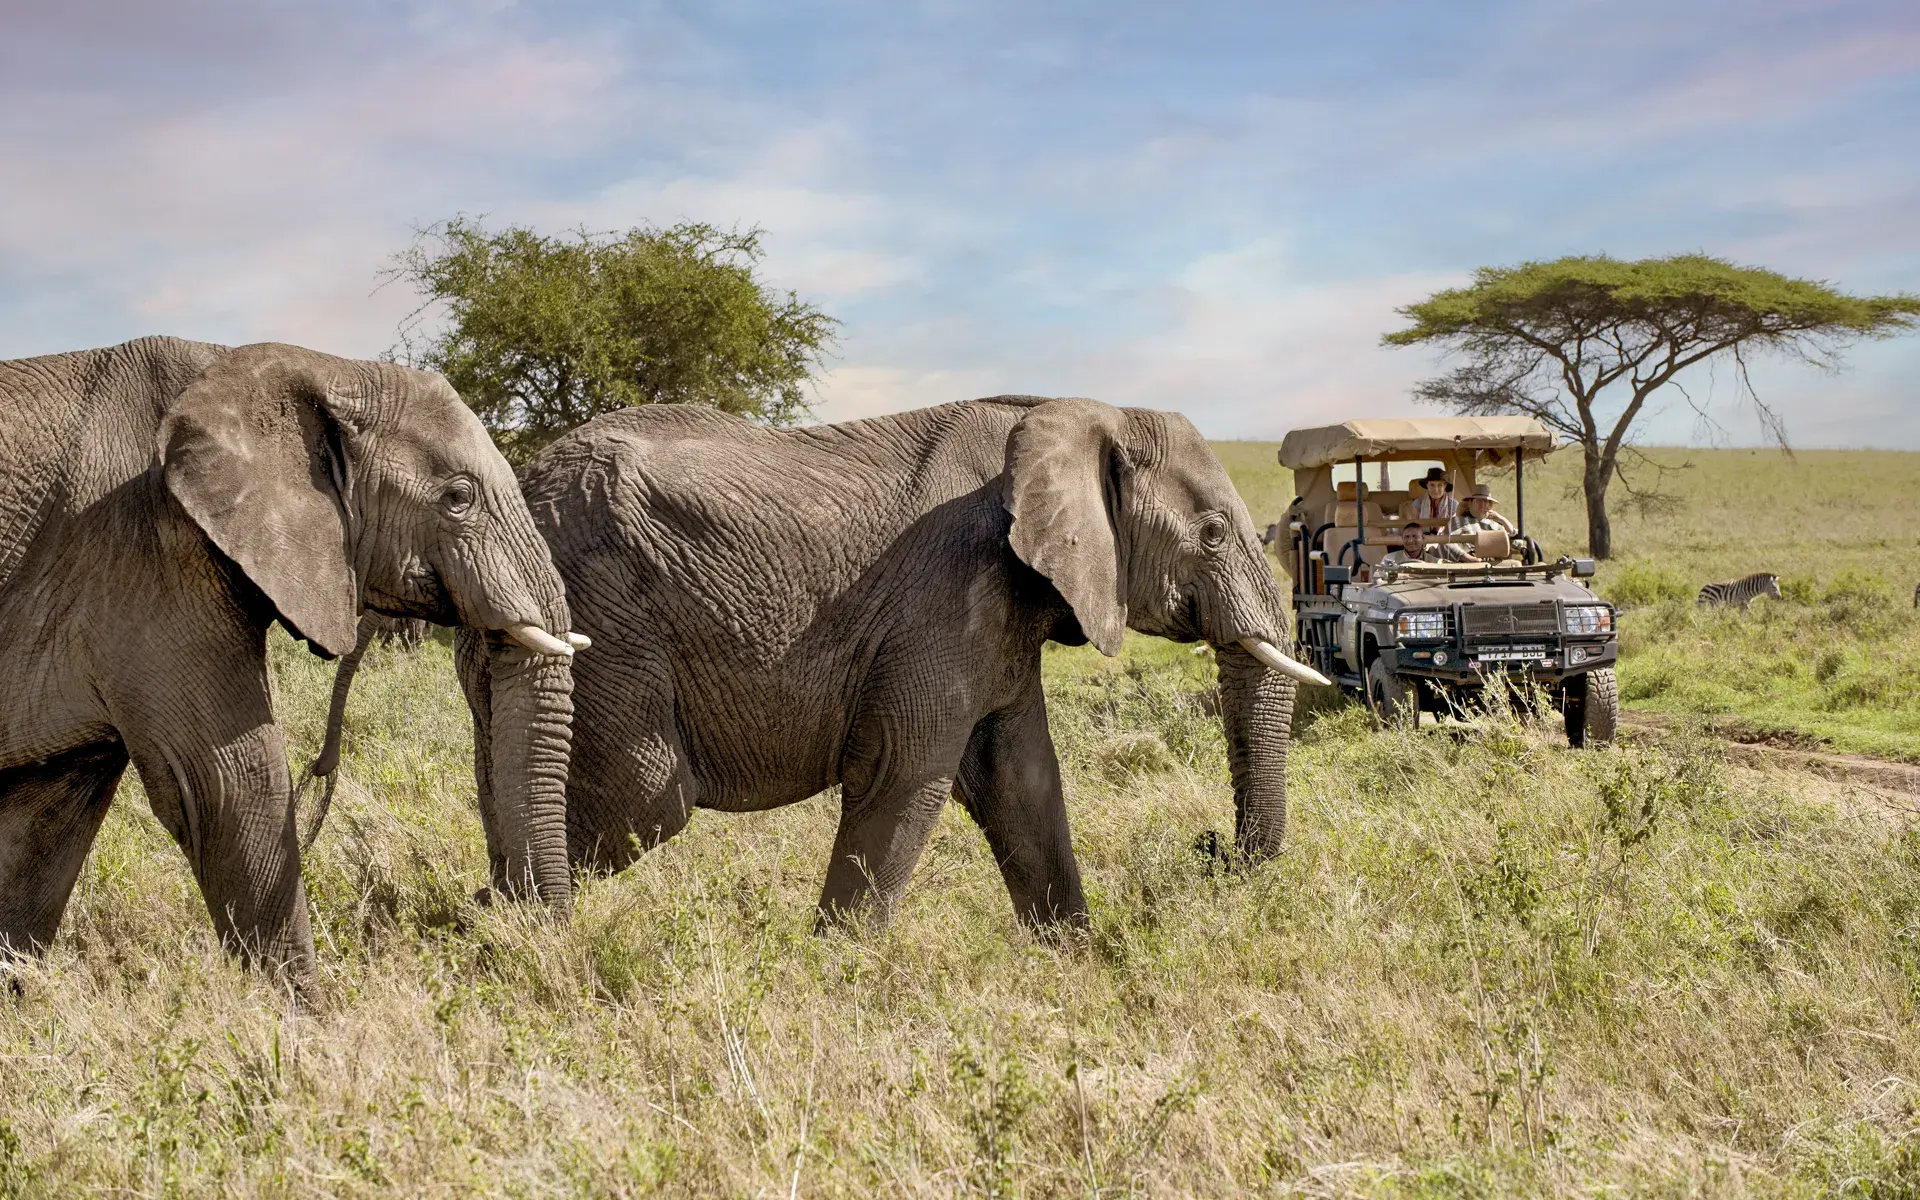 A luxury safari game drive at One Nature Mara River, with a captivating sight of elephants roaming the Serengeti.